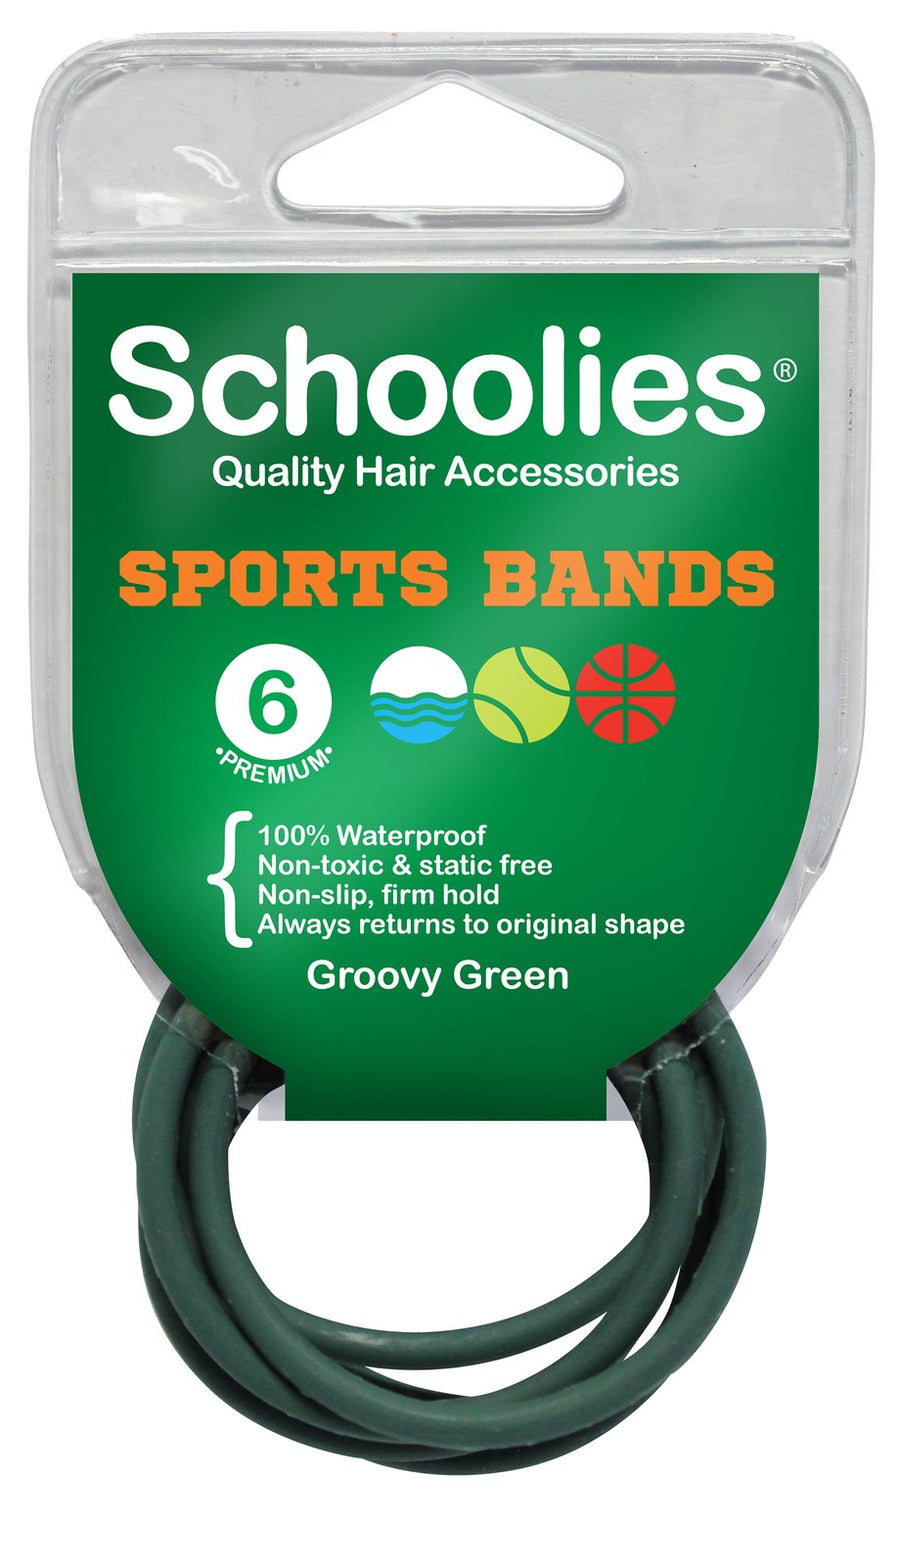 Schoolies Sports Bands 6pc Groovy Green